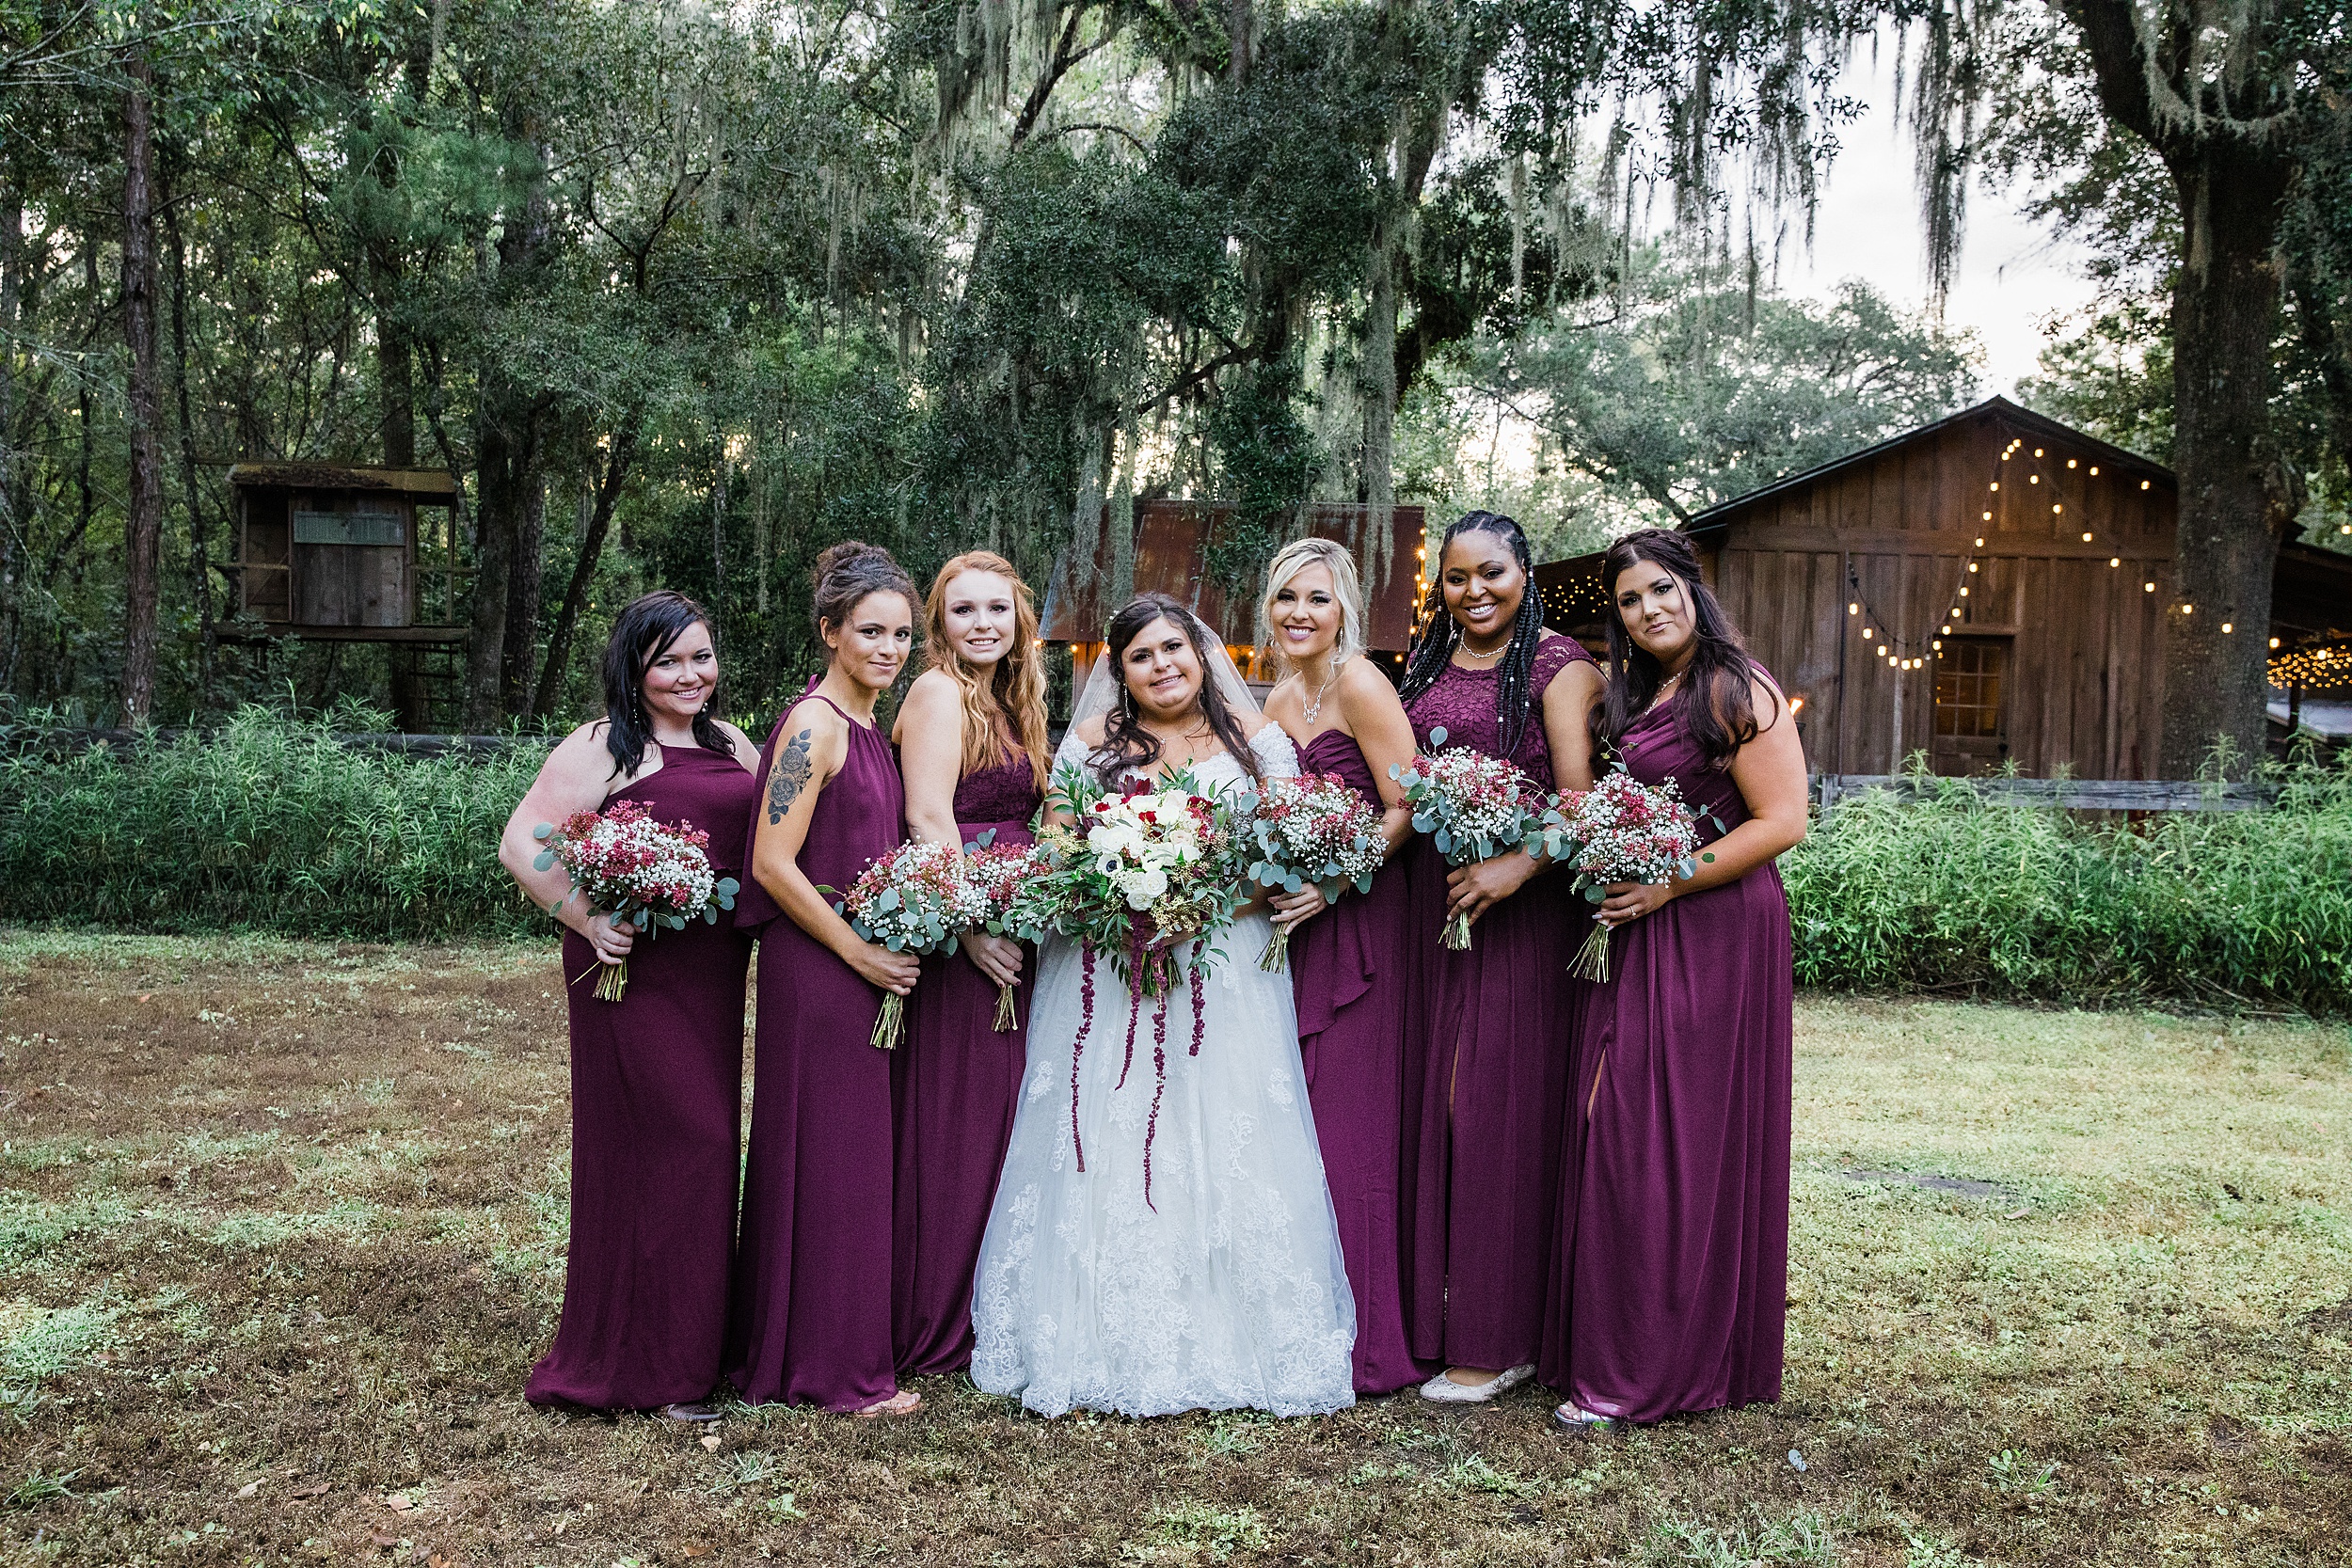 A bride stands with her bridesmaids all in purple dresses and holding bouquets